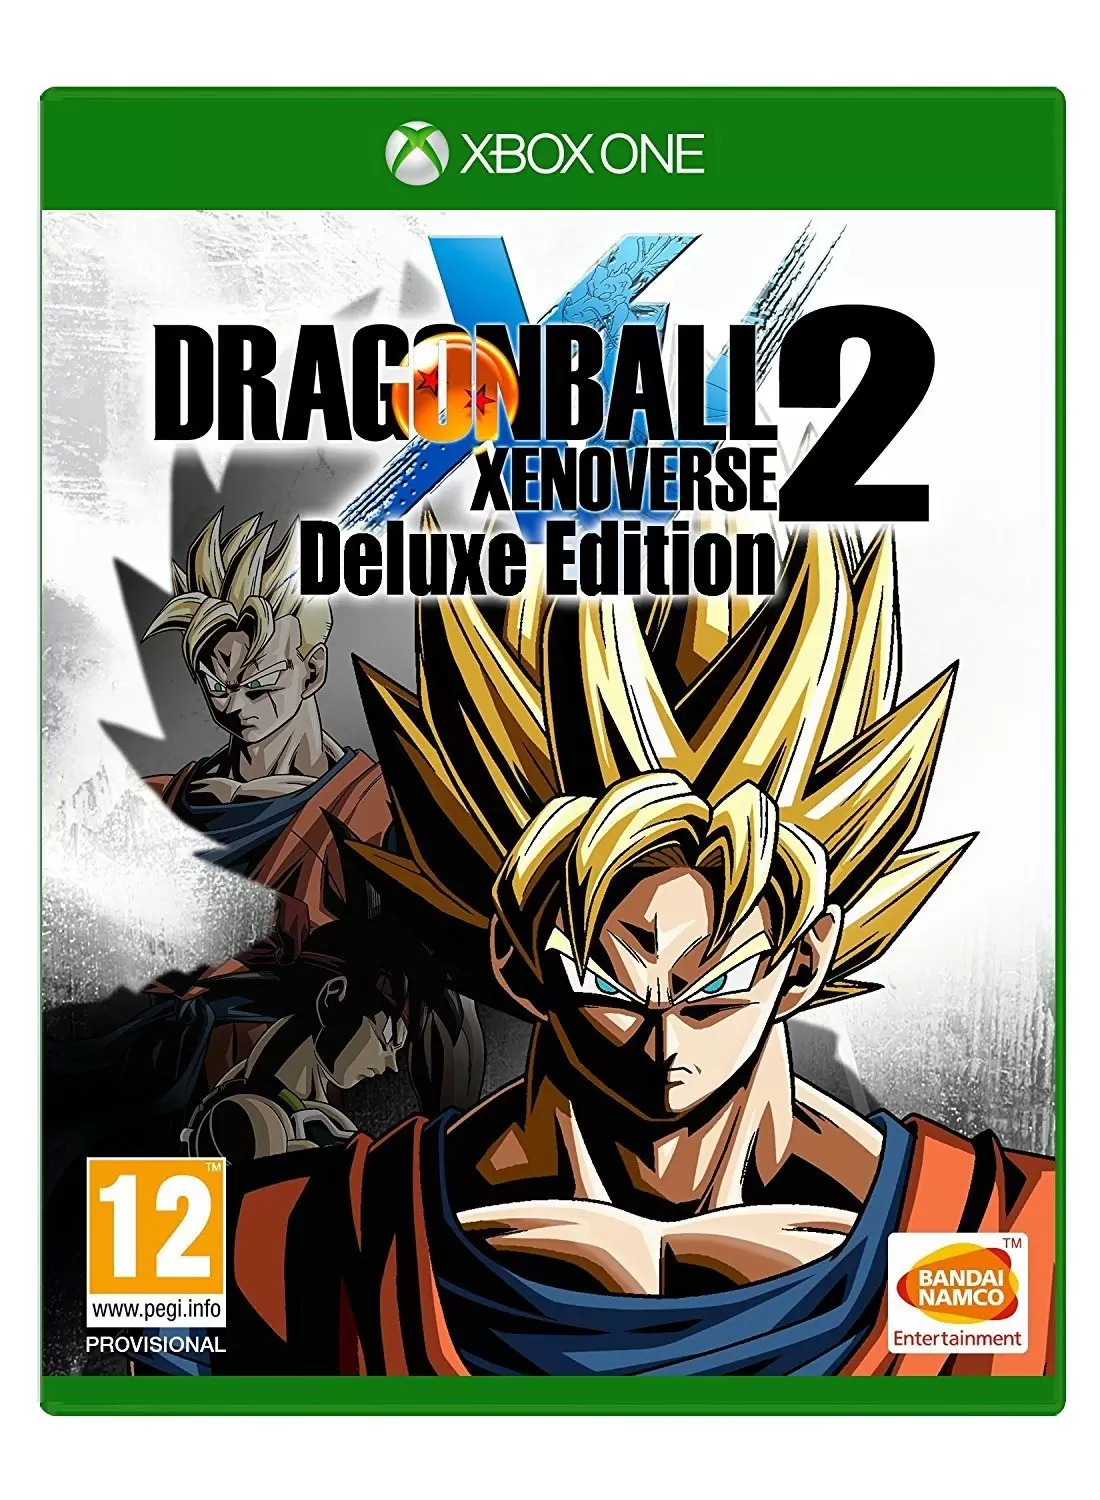 Jeux XBOX One - DRAGON BALL XENOVERSE 2 DELUXE EDITION